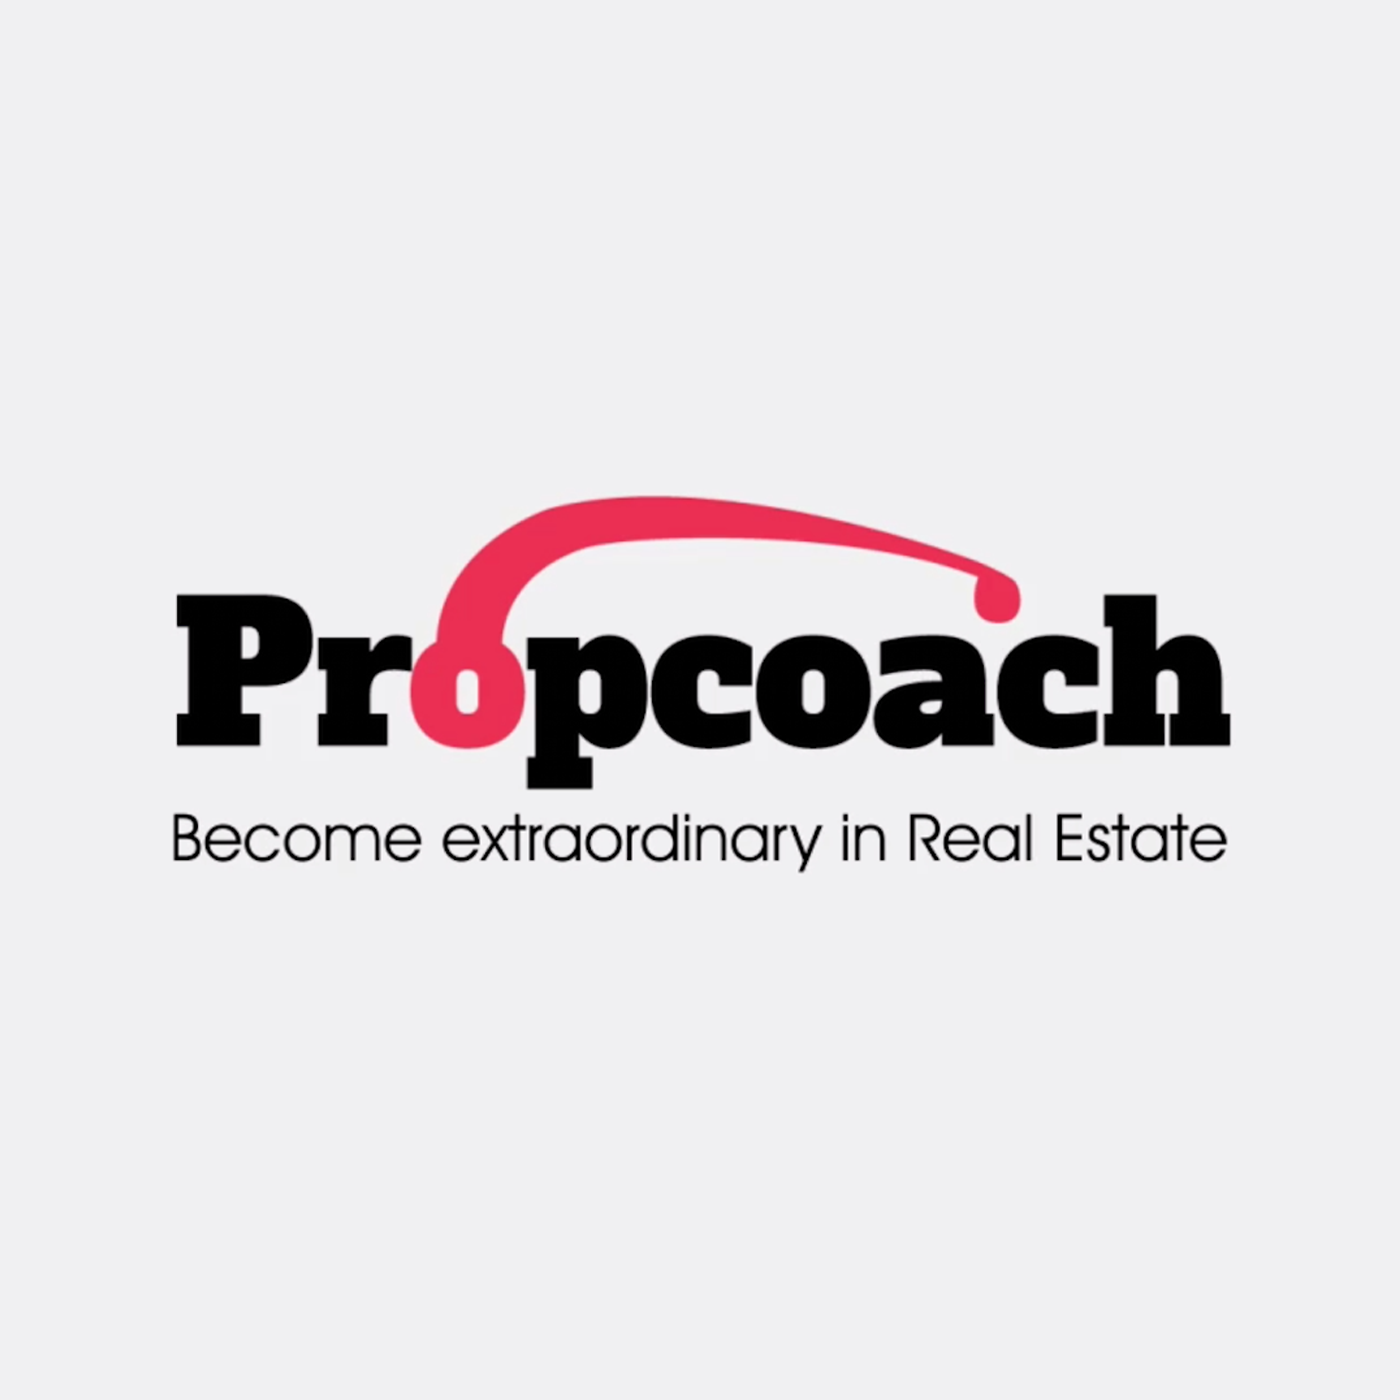 Propcoach Podcast #0003 - Are Real Estate Agents Still Relevant in the Future